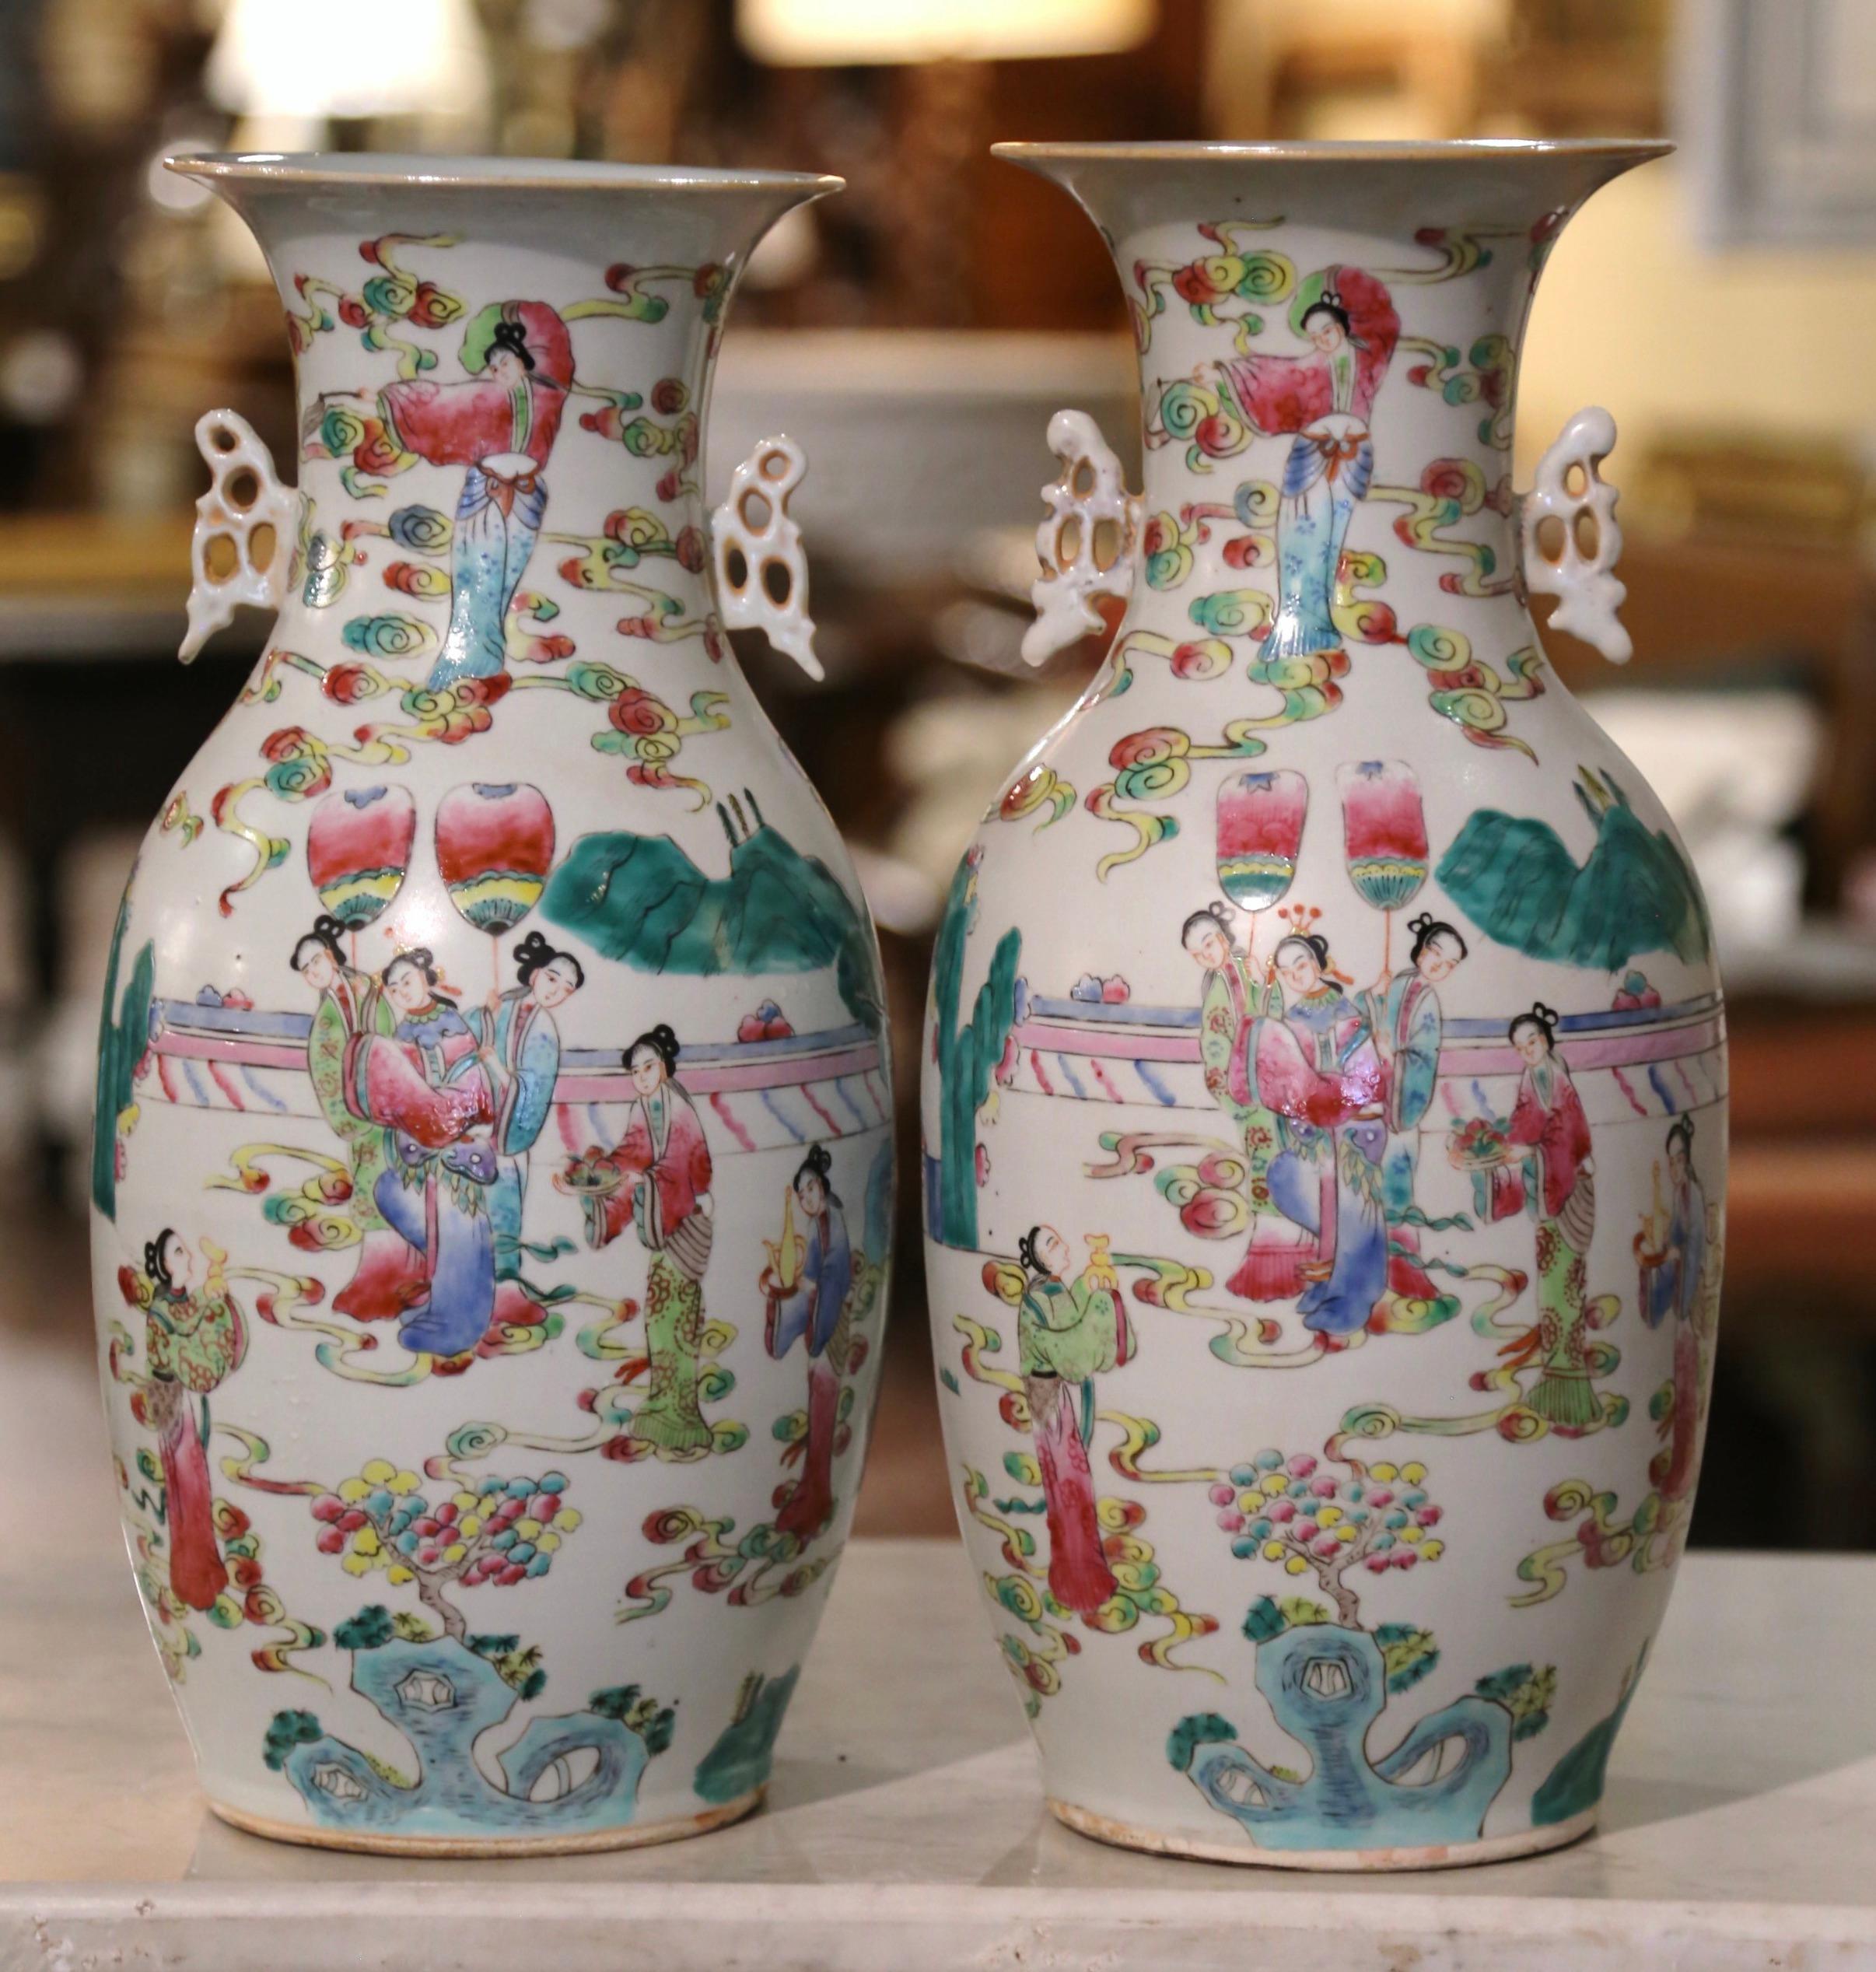 These elegant vases were created in China circa 1950. The large vessels made of porcelain, feature a flared rim over a tapered body embellished by butterfly form handles on either side. Each vase is decorated with hand painted polychrome enameled